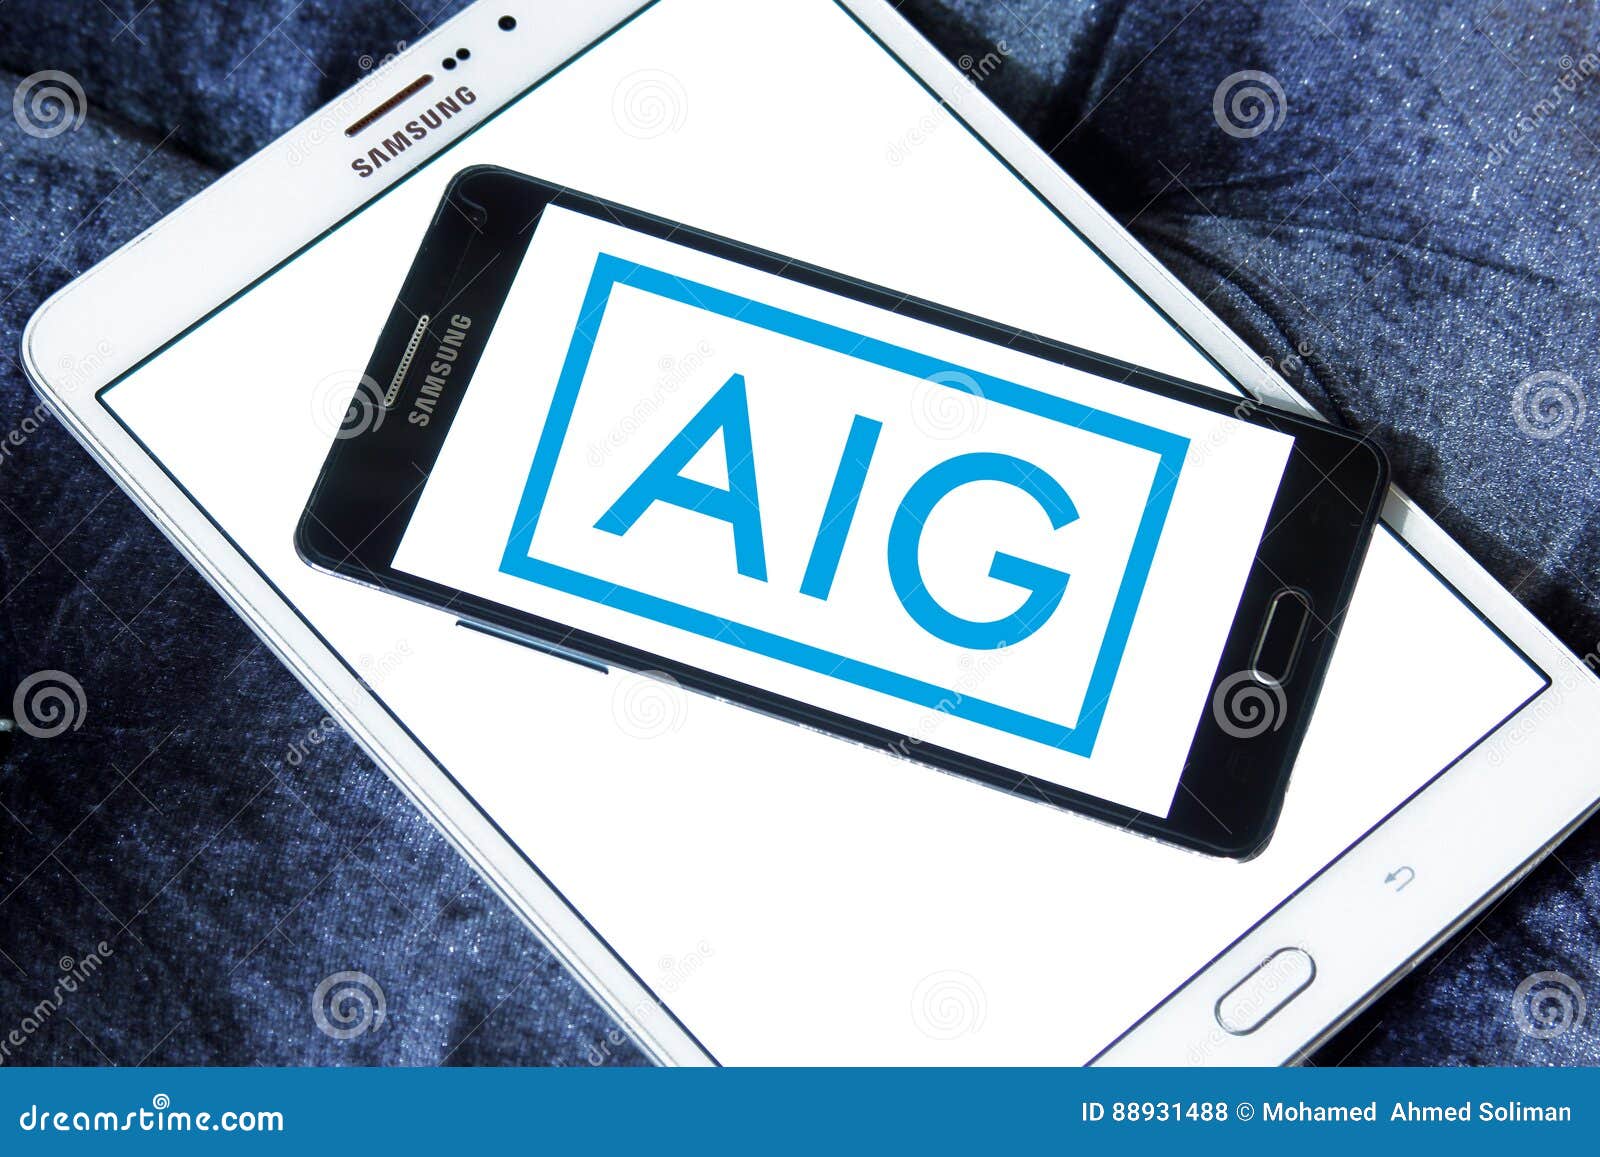 Aig Insurance Logo Editorial Stock Photo Image Of Collection 88931488